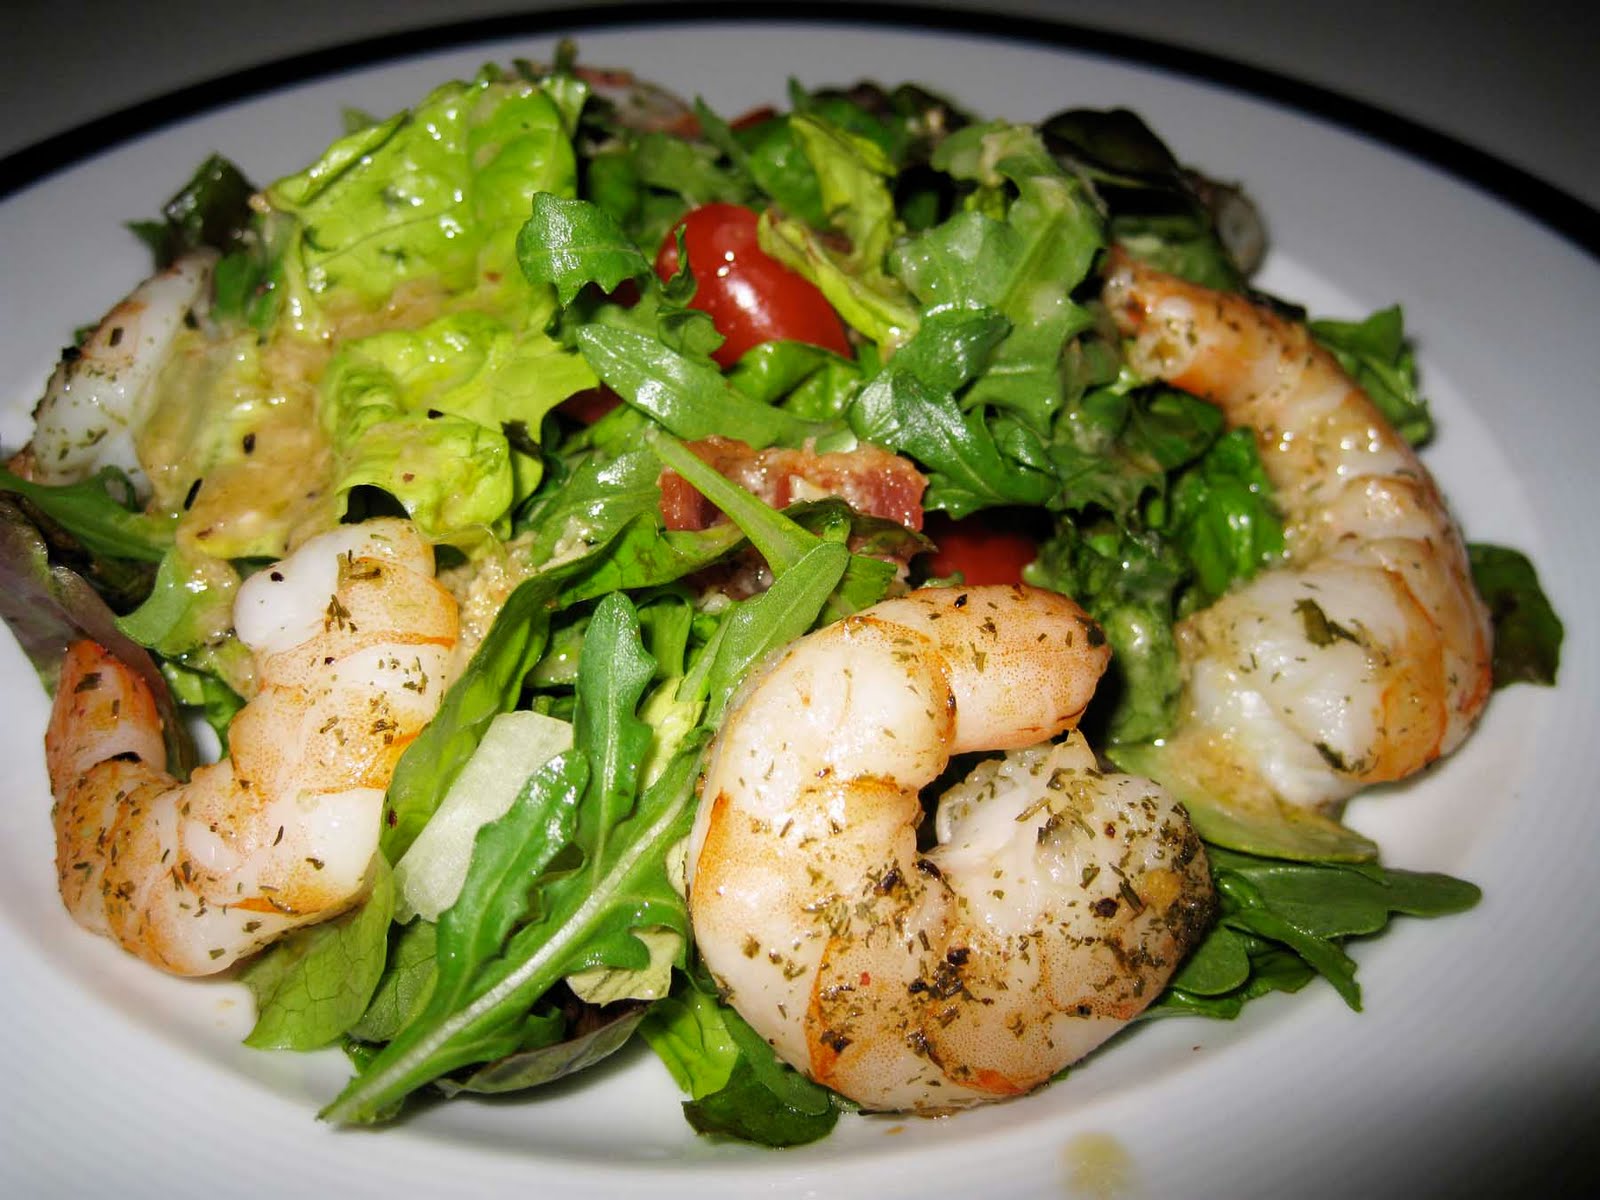 Straight No chaser: Quick and Easy Shrimp Salad